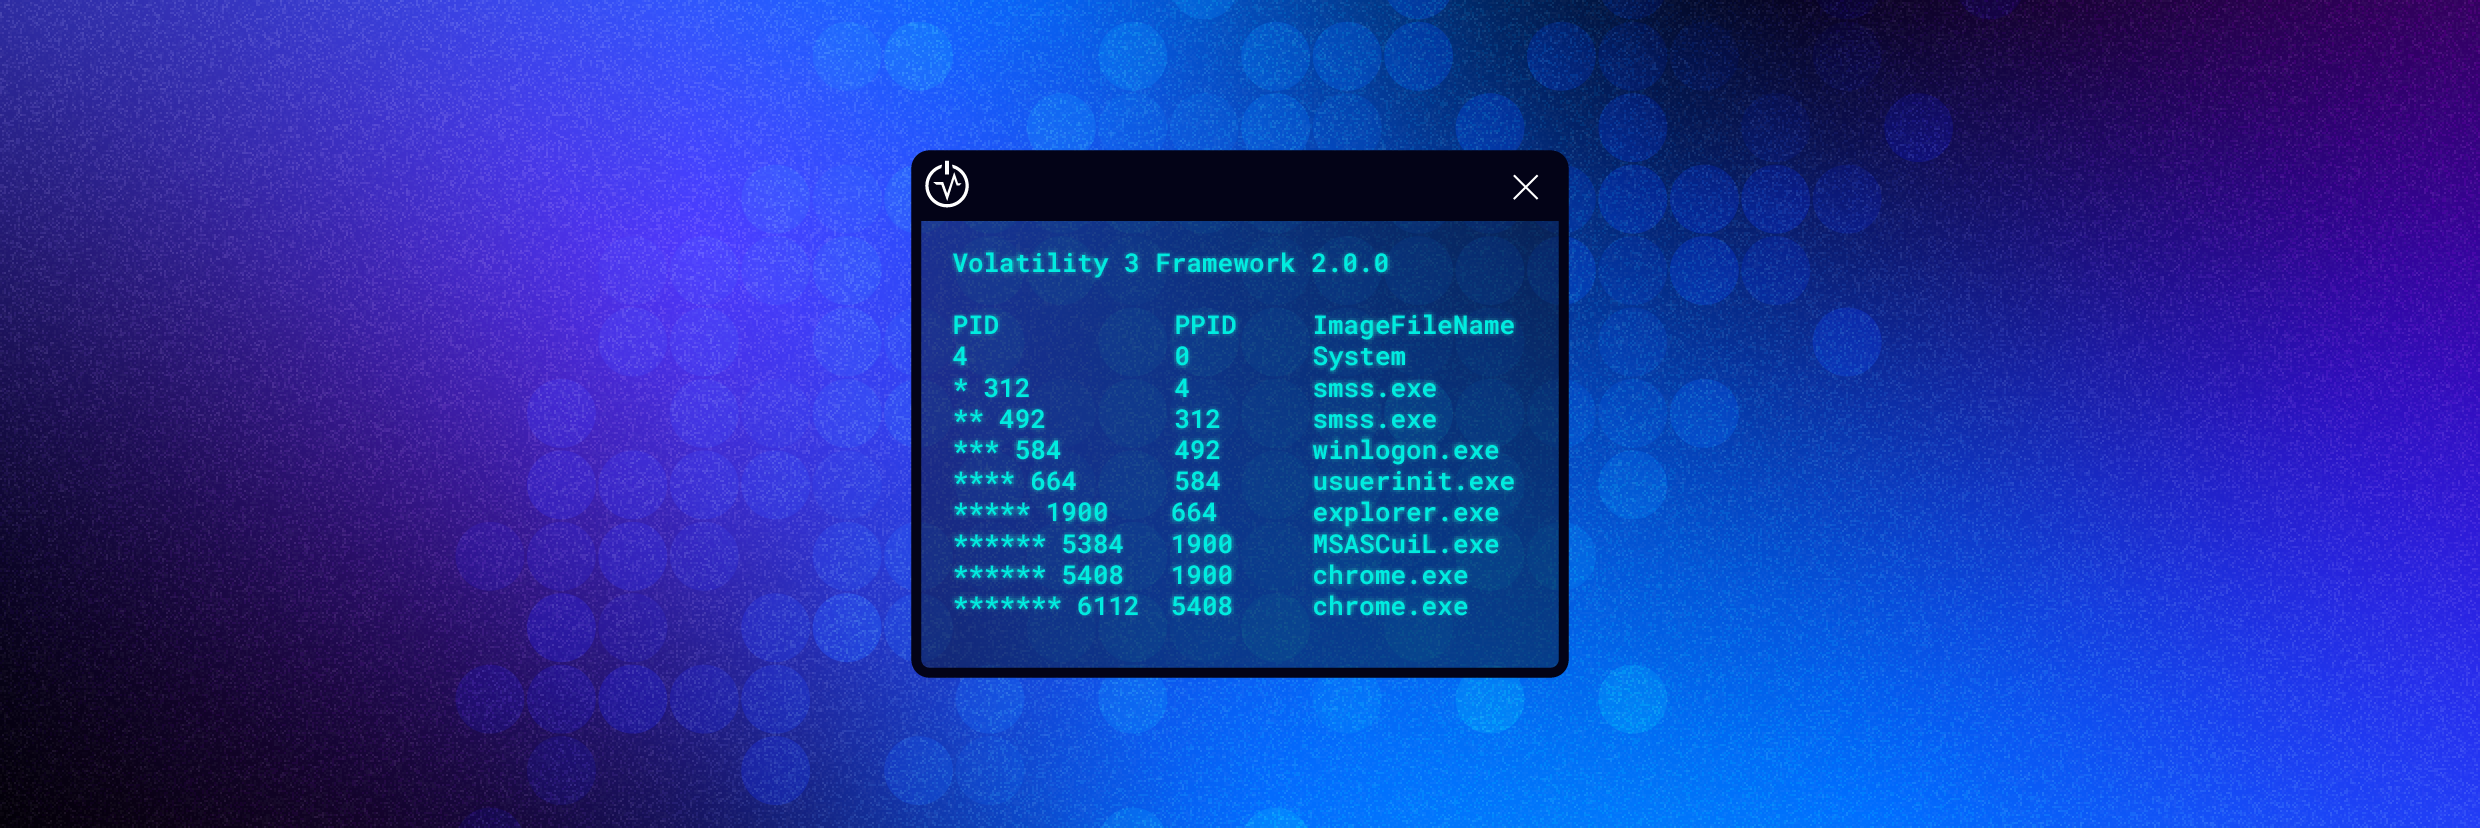 How to Use Volatility for Memory Forensics and Analysis | Varonis